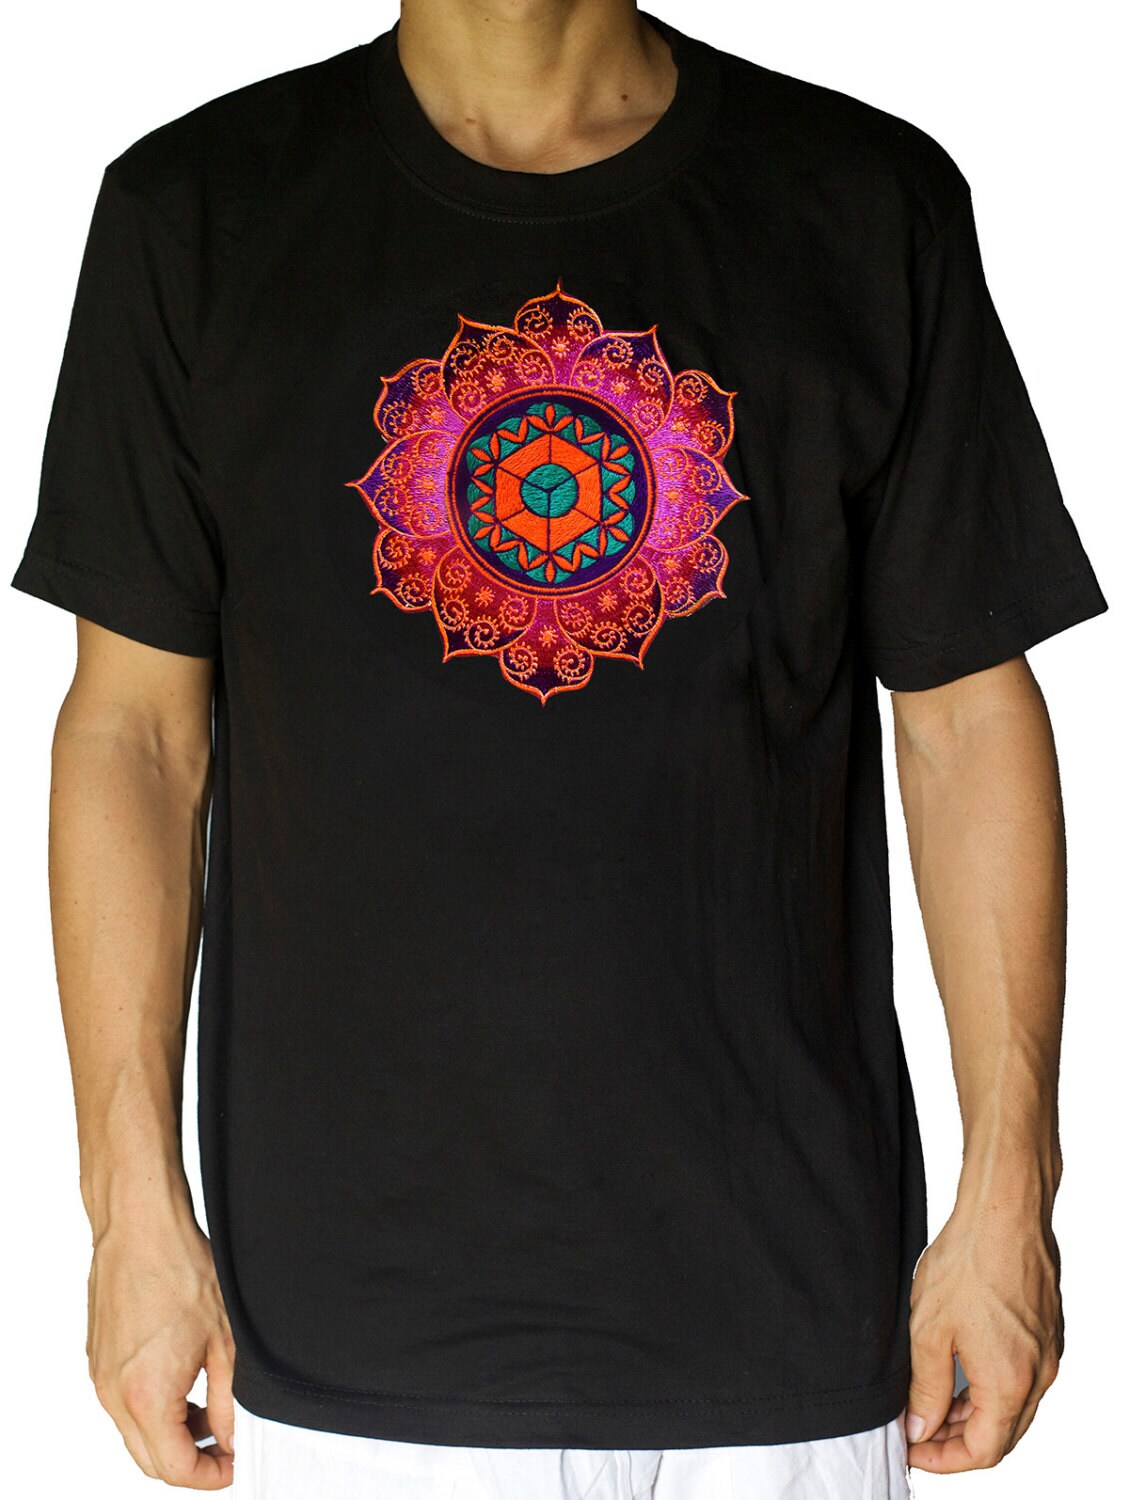 Element Earth holy geometry T-Shirt - fractal mandala embroidery no print handmade - choose any colour and size